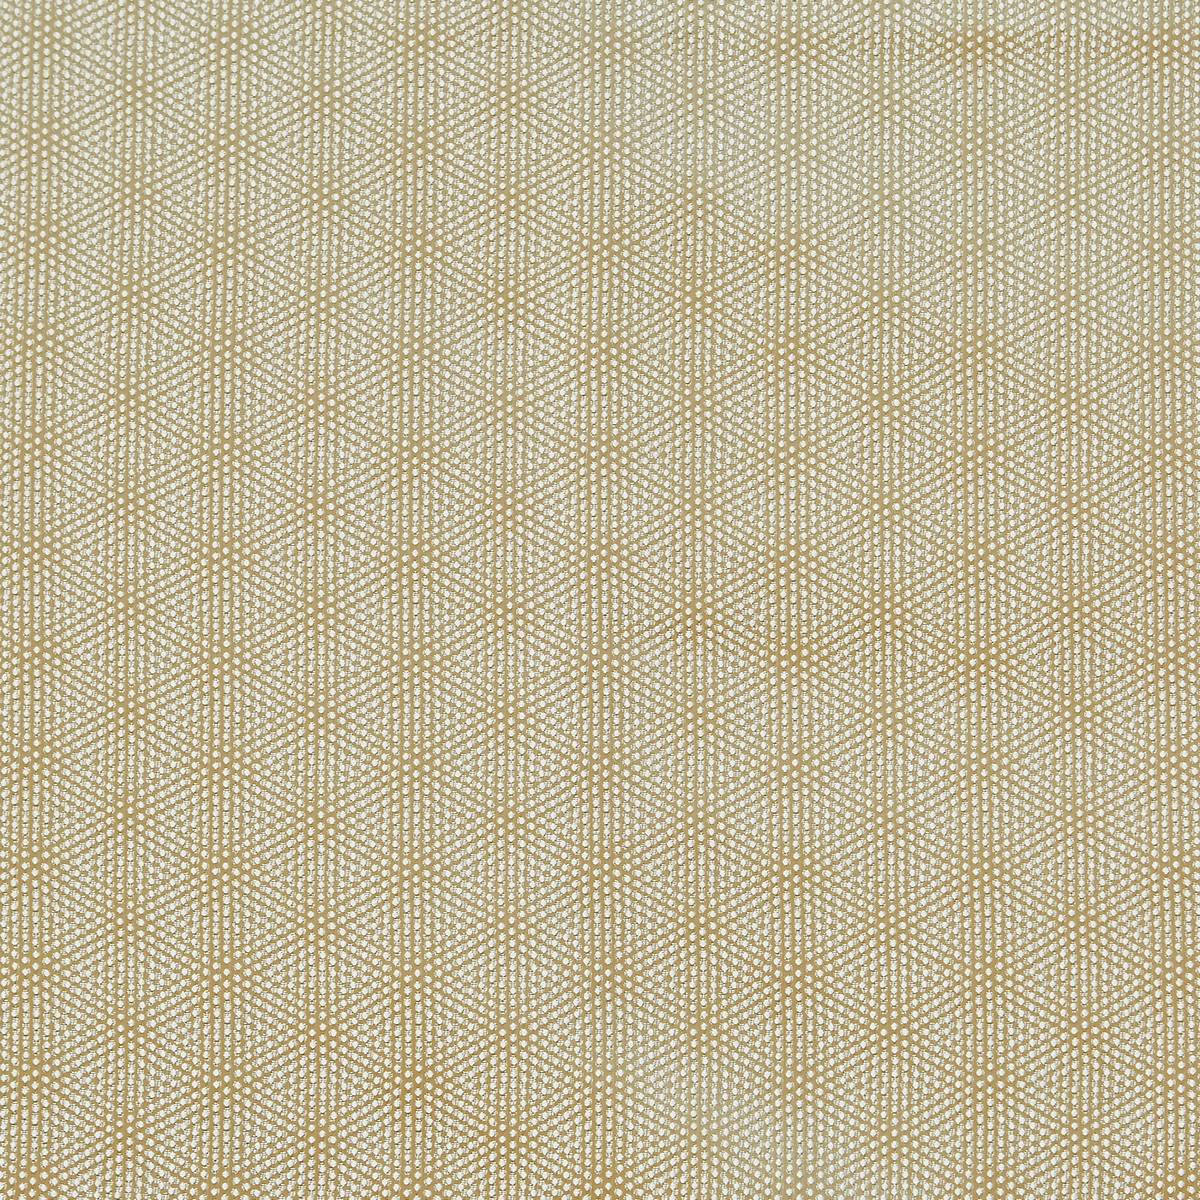 Limitless Satinwood Fabric by Prestigious Textiles